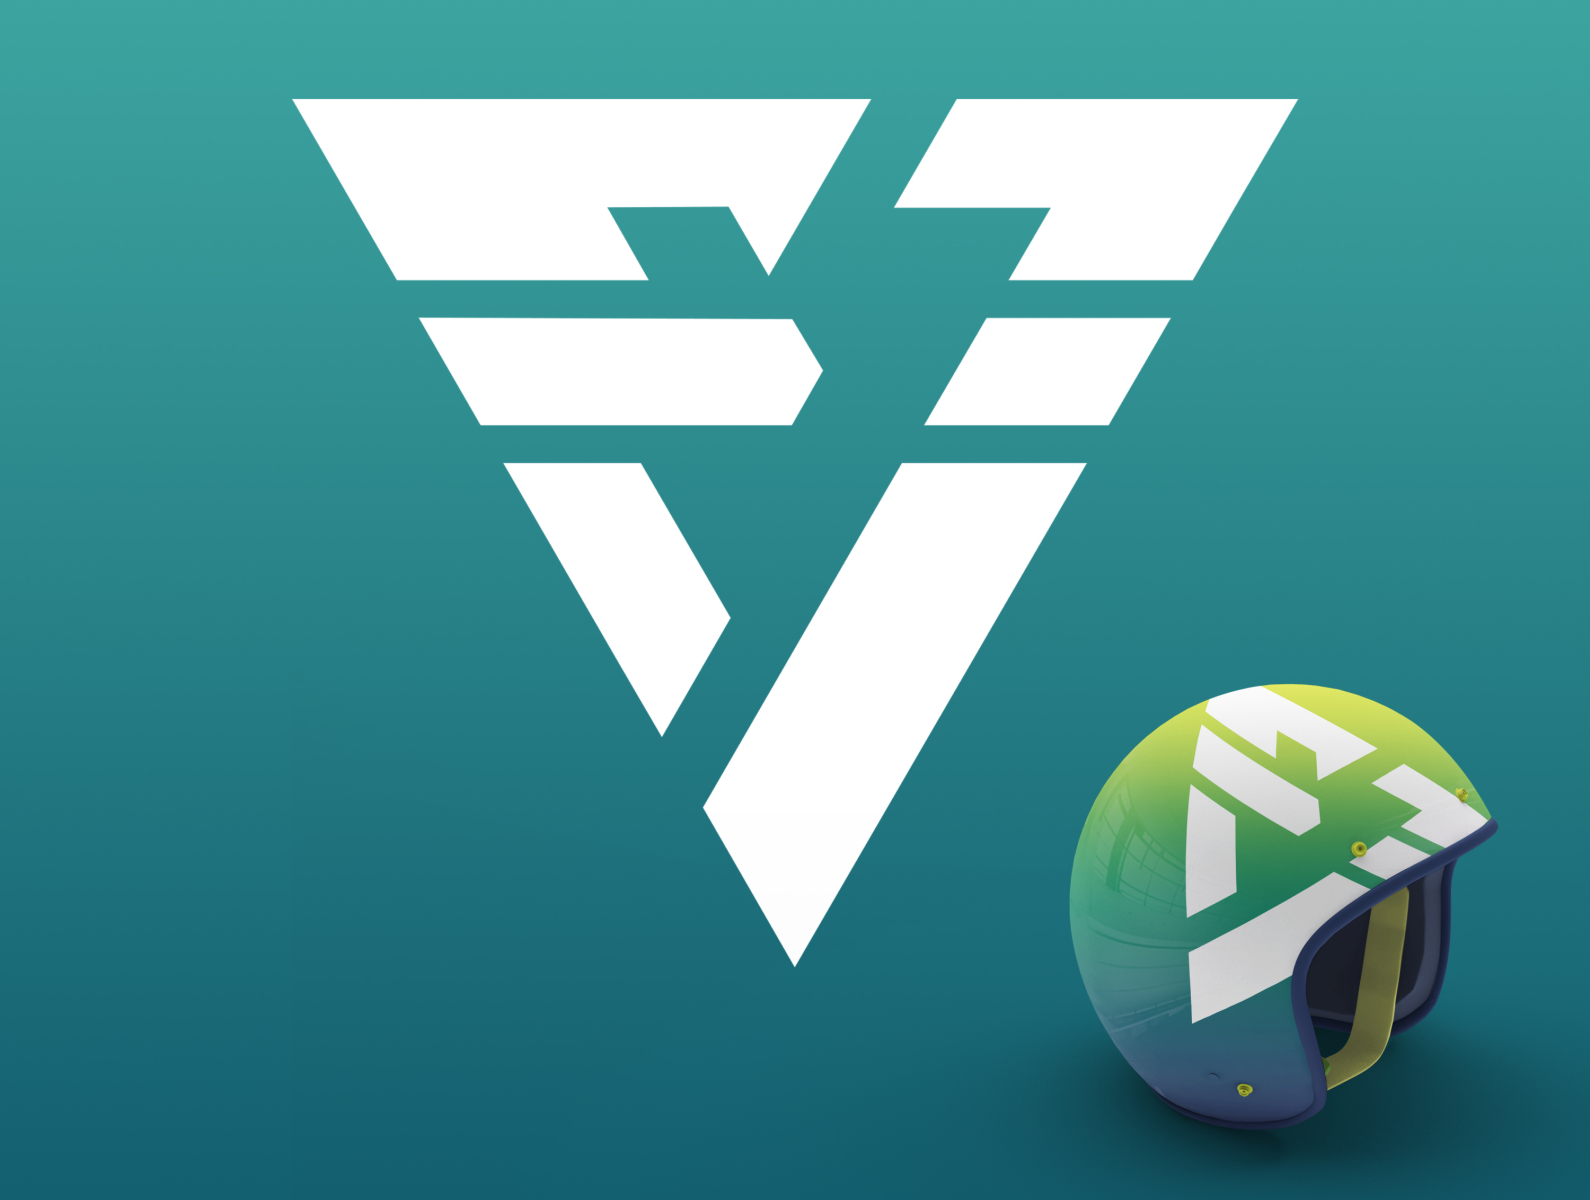 f7-logo-design-by-mihundesign-on-dribbble